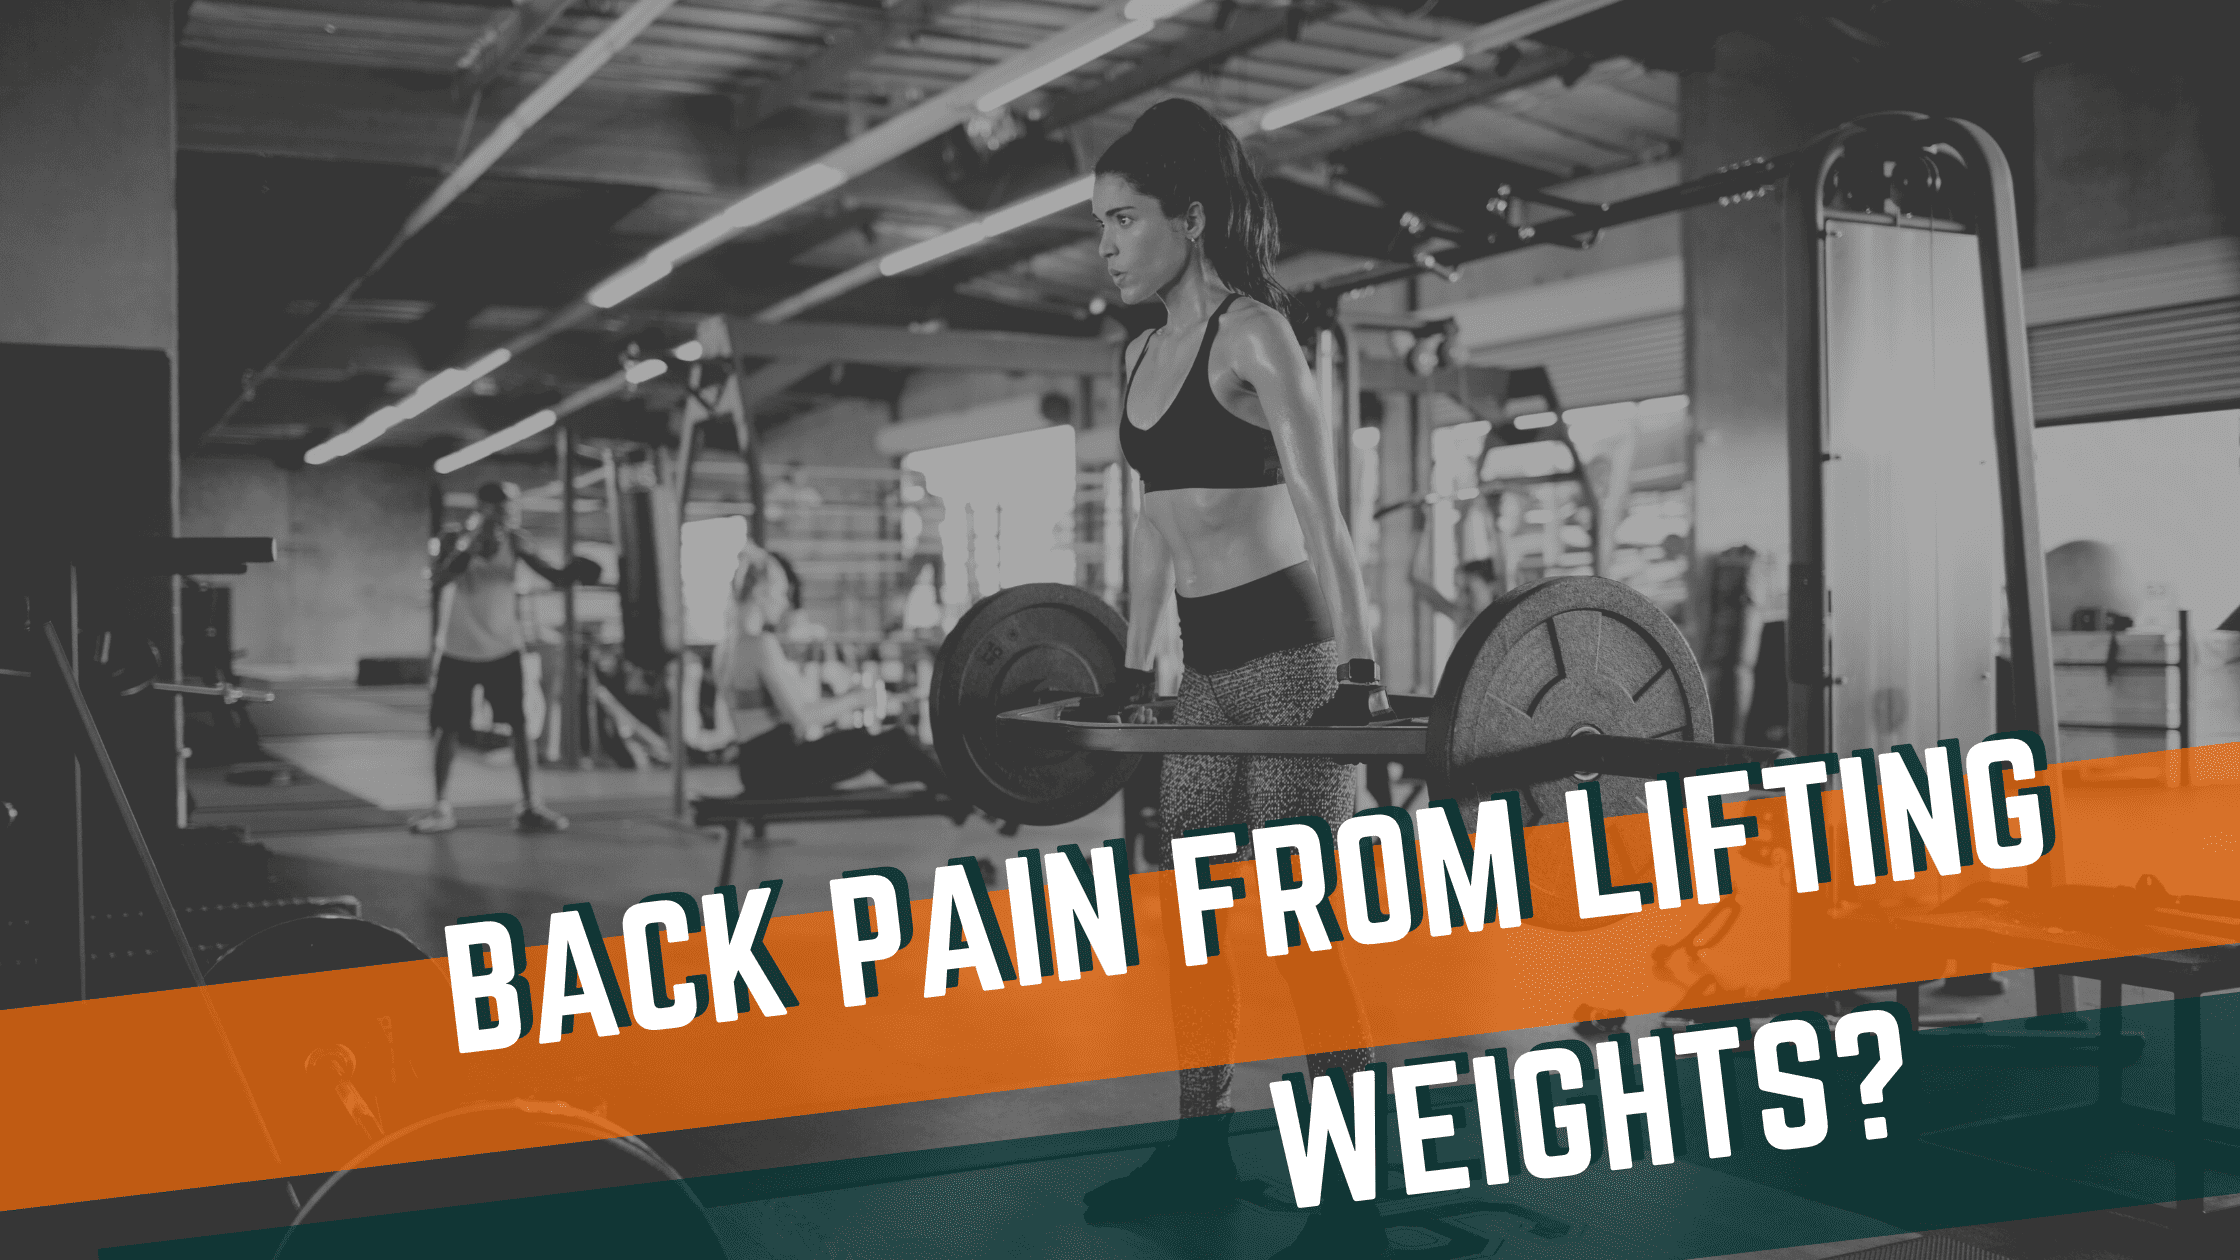 Featured image for “Experiencing Back Pain from Lifting Weights? Common Weightlifting Mistakes & Tips for Proper Form”